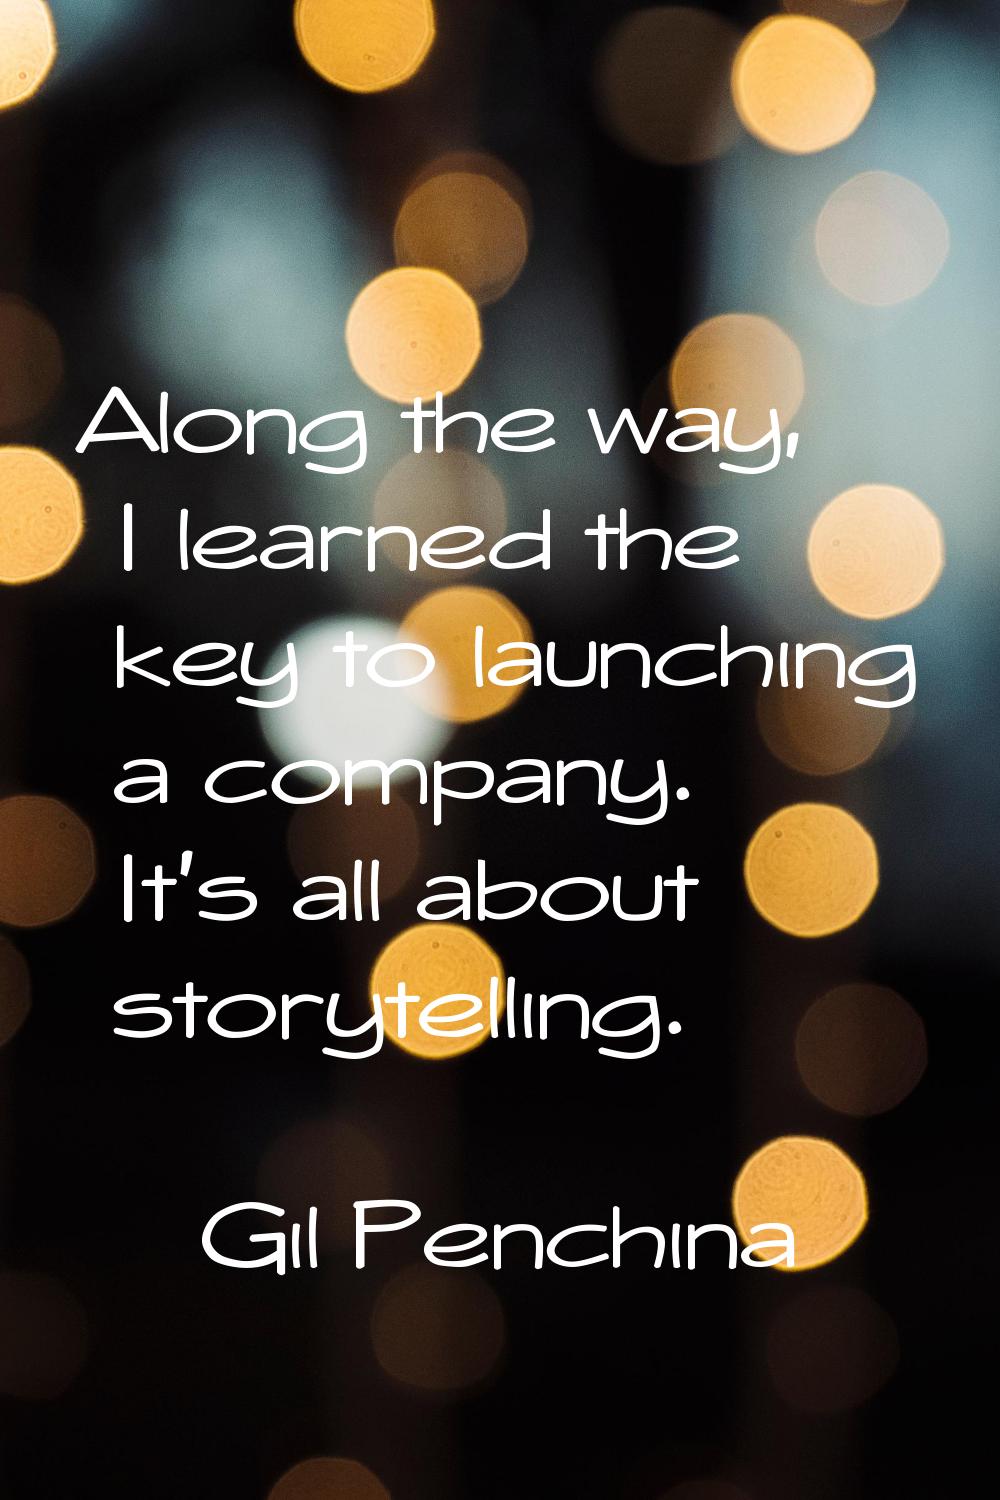 Along the way, I learned the key to launching a company. It's all about storytelling.